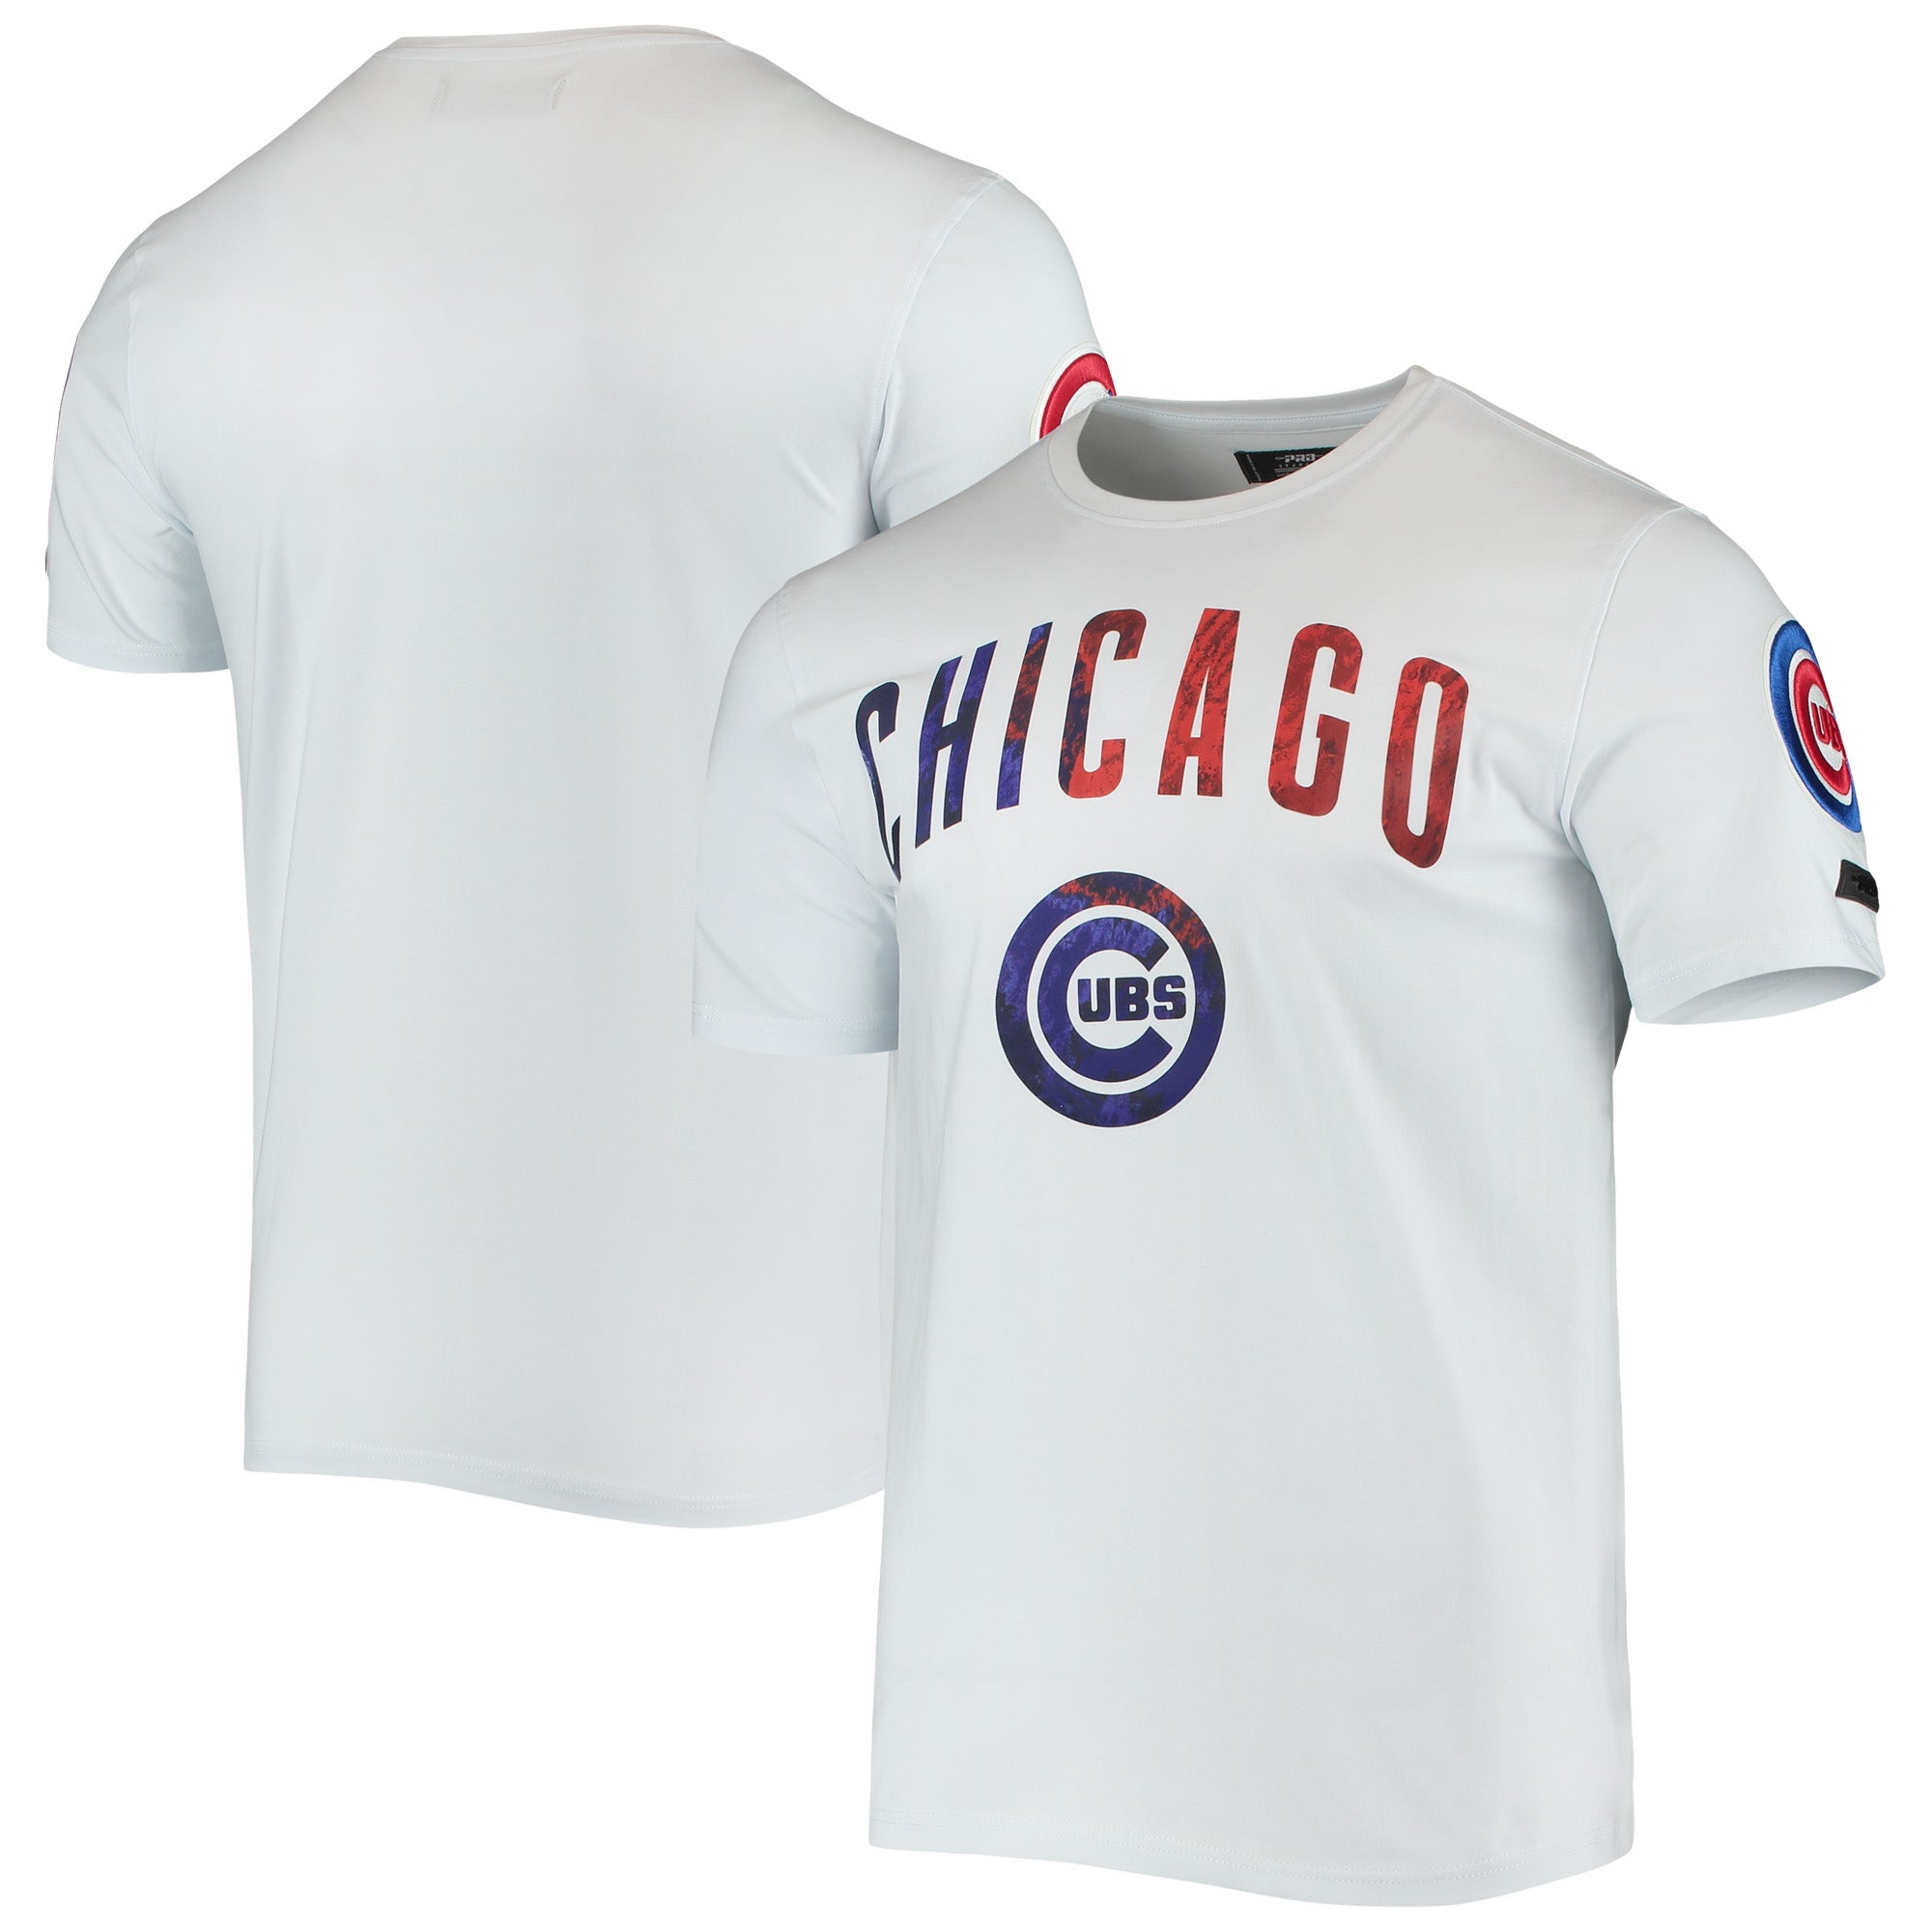 Chicago Cubs Pride Tie-Dye T-Shirt